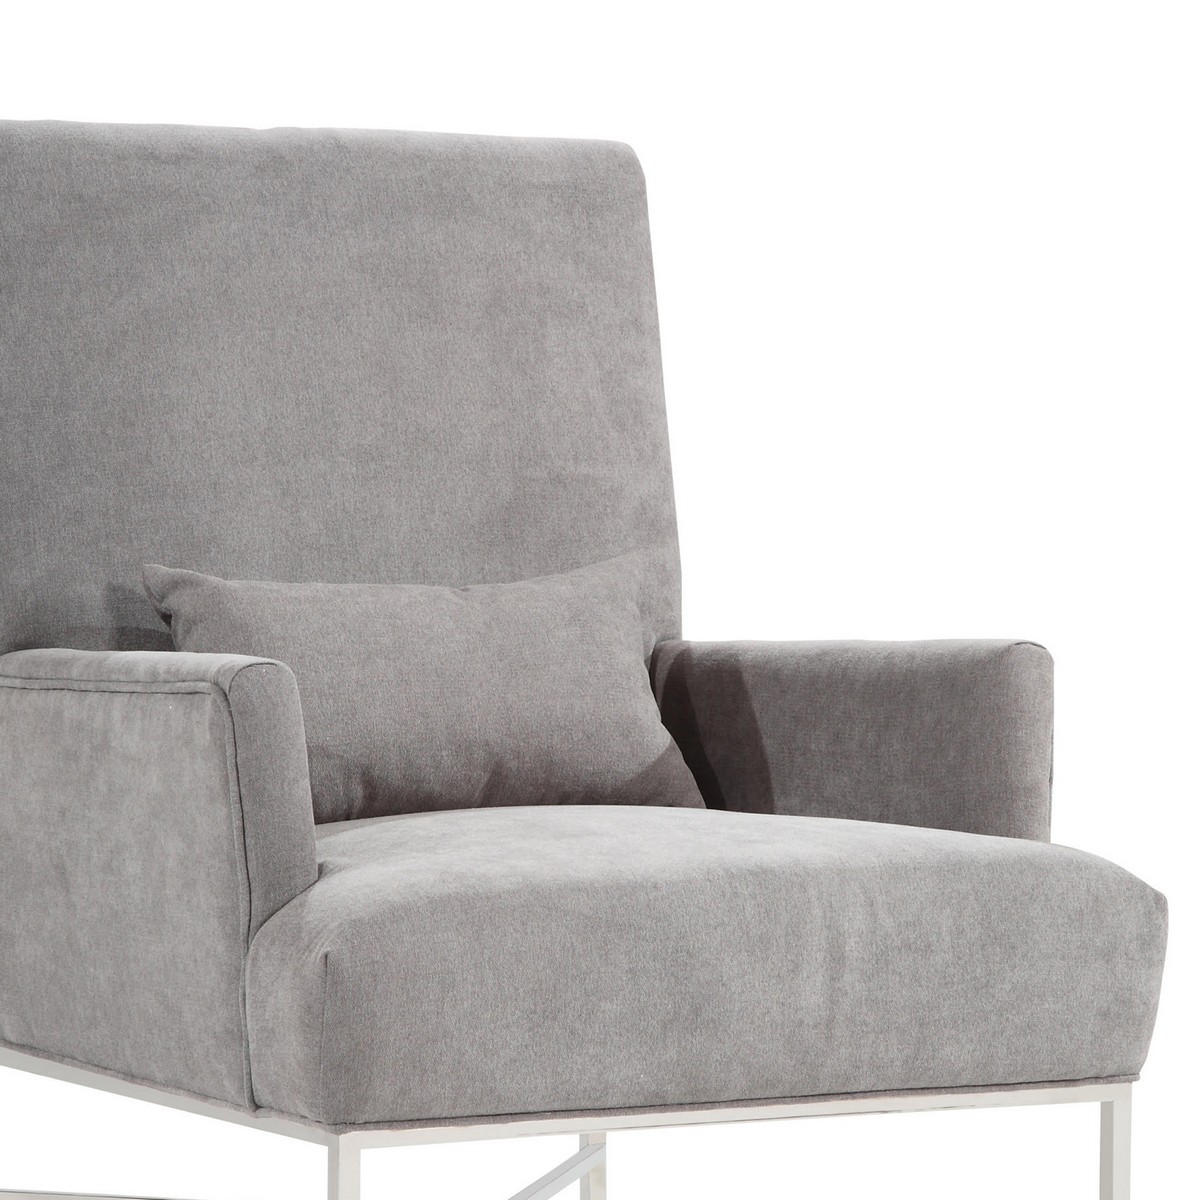 Armen Living York Contemporary Accent Chair In Gray Chenille and Steel Finish